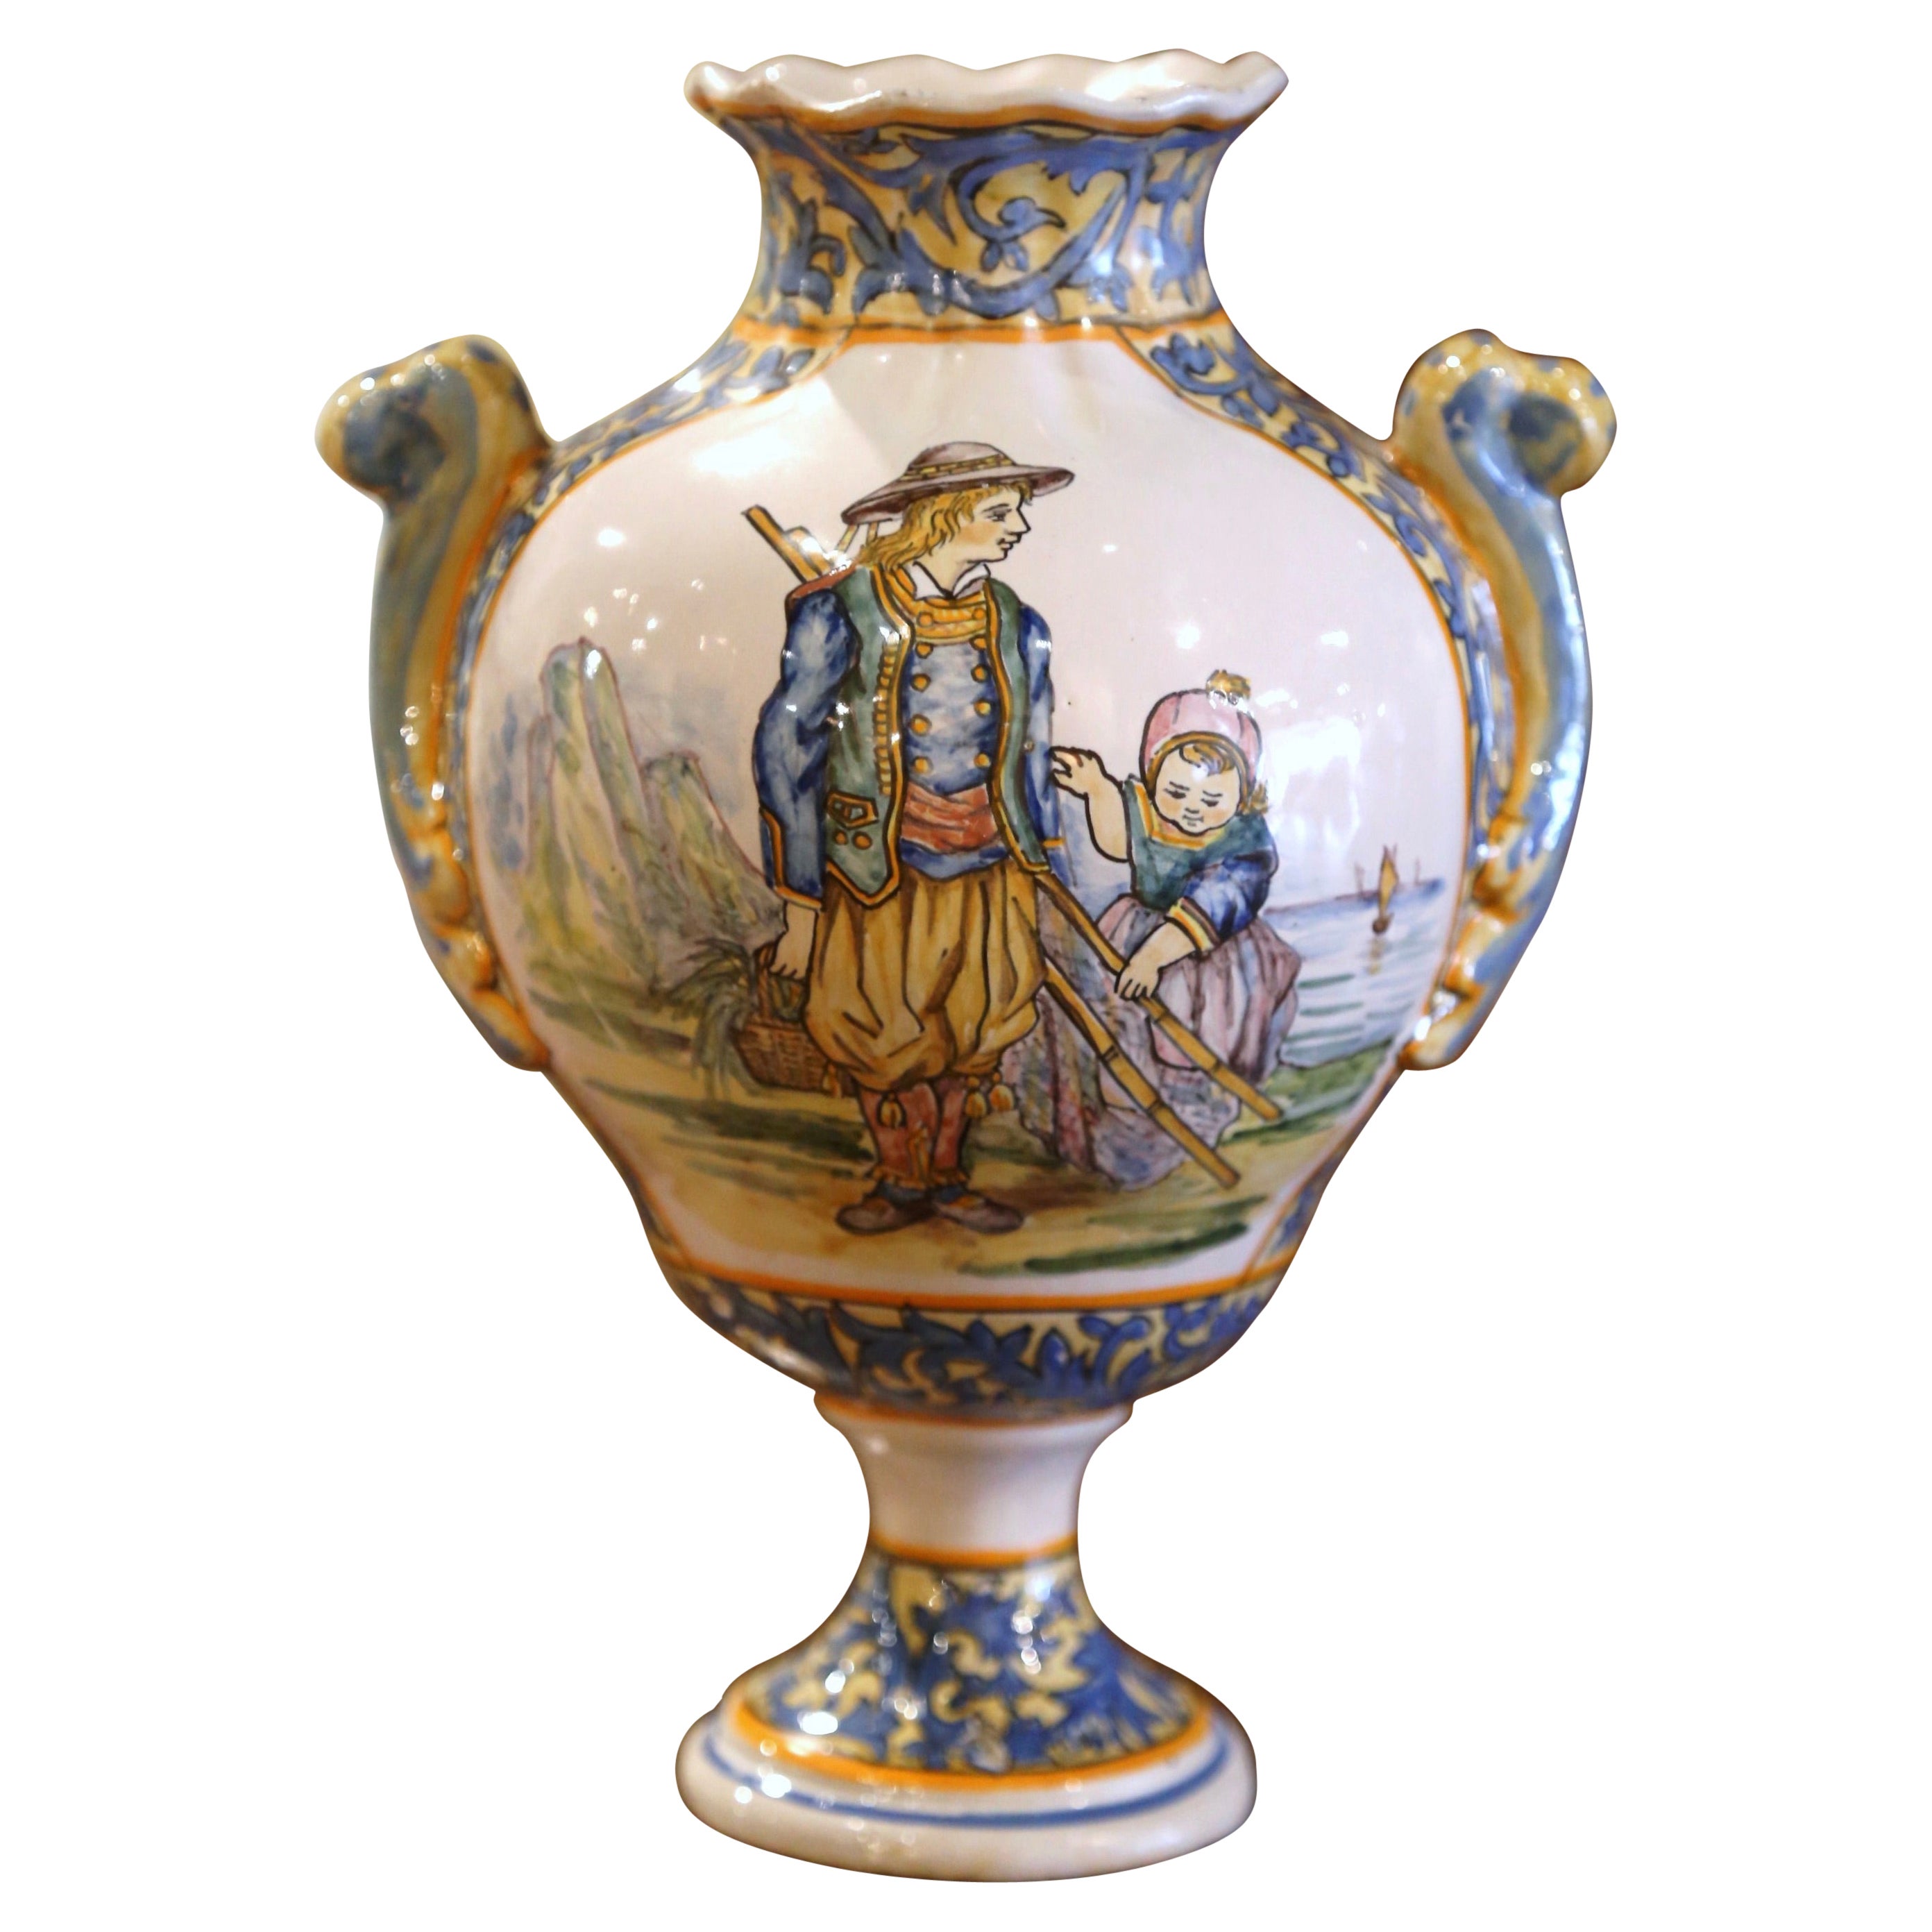 19th Century French Hand Painted Faience "Porquier Beau" Quimper Vase